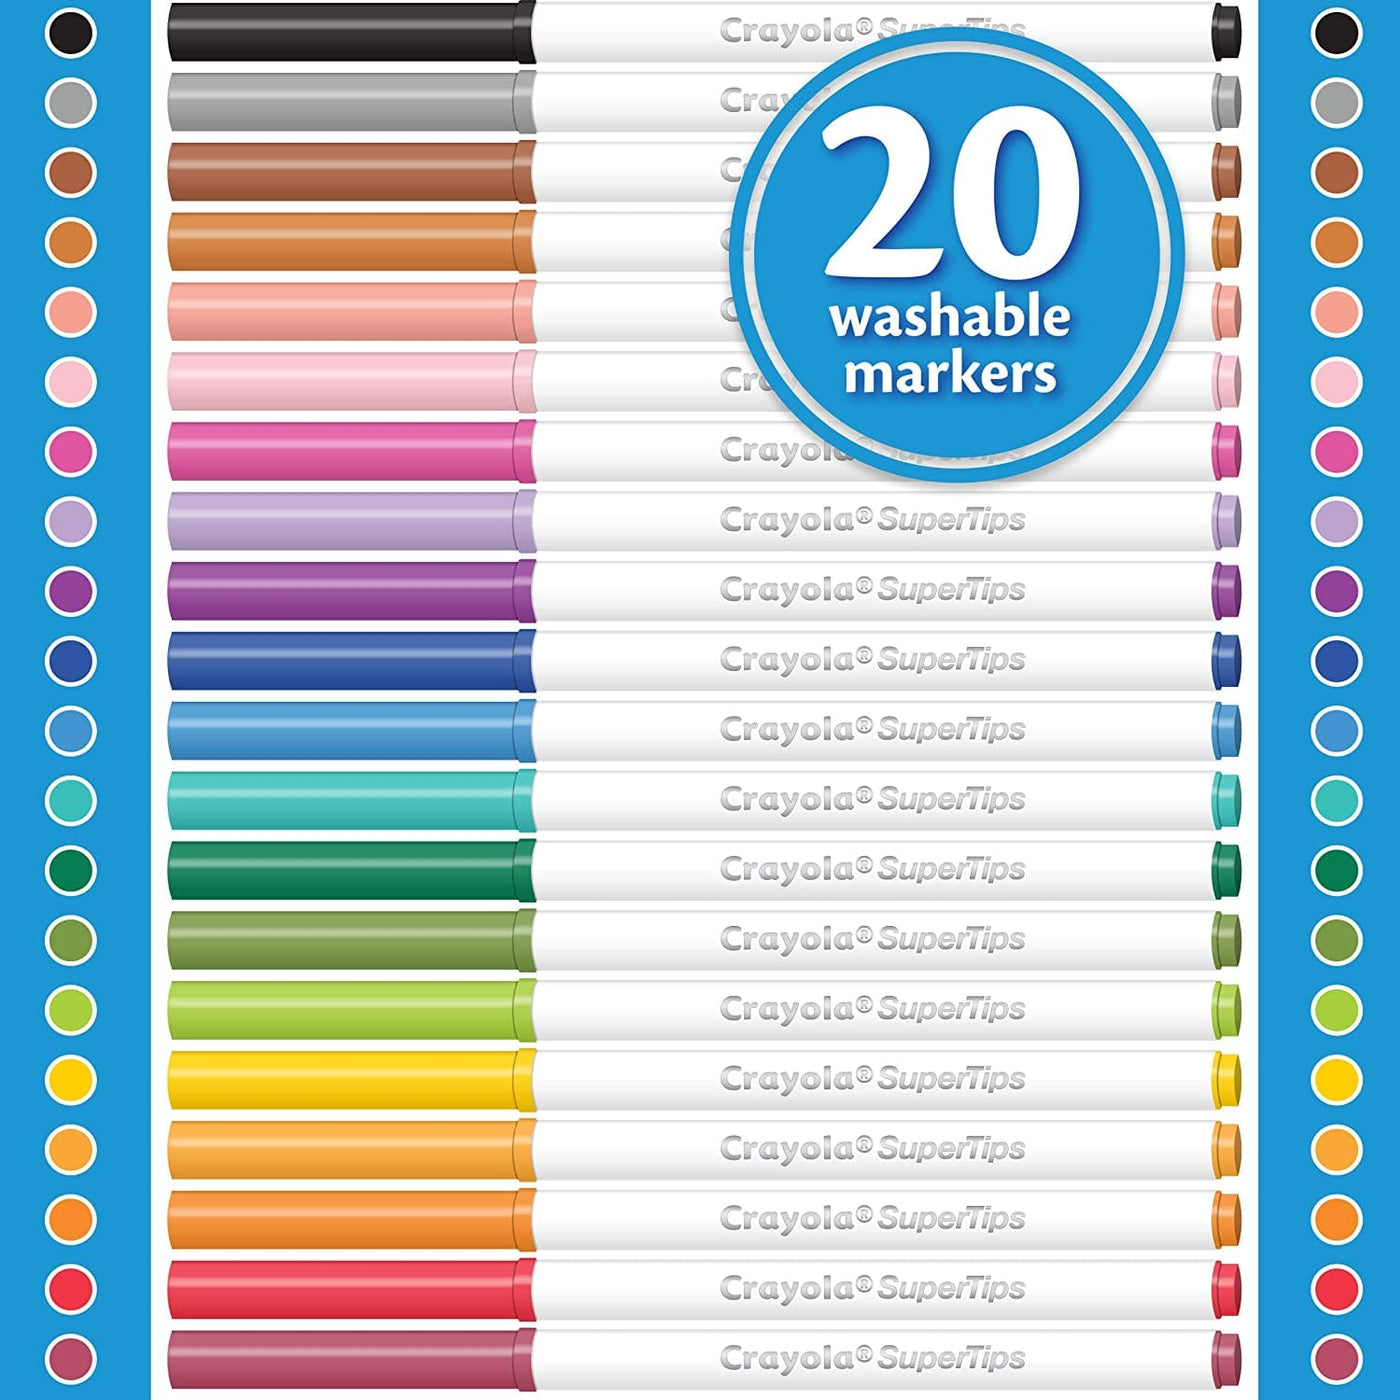 Washable Super Tips Markers,20 Count | Crayola by Crayola, USA Art & Craft